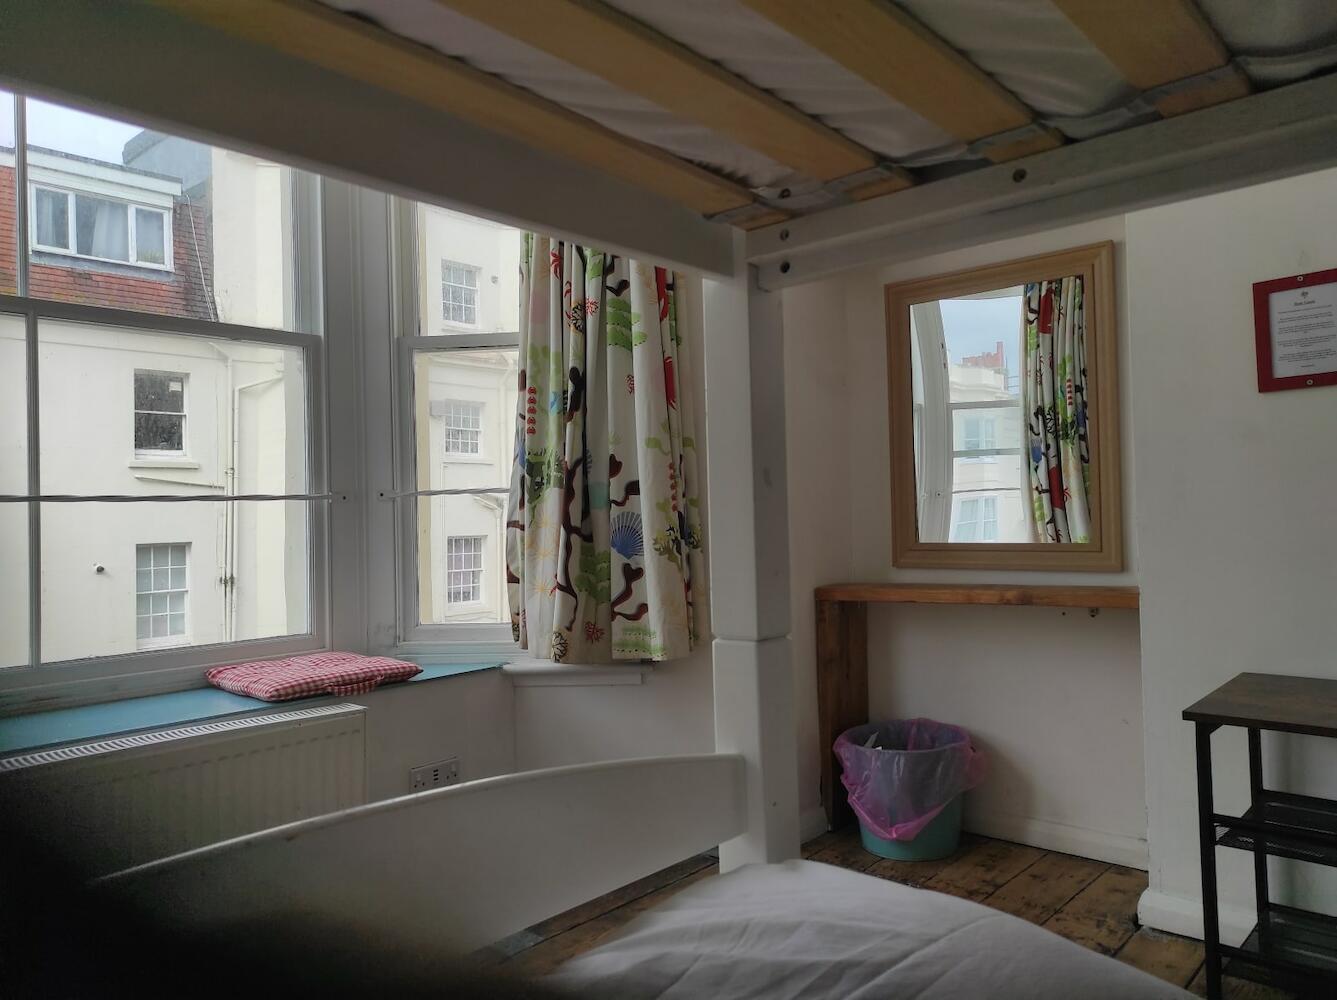 Seadragon Backpackers in Brighton - Prices 2020 (Compare Prices at Hostelworld + Booking)